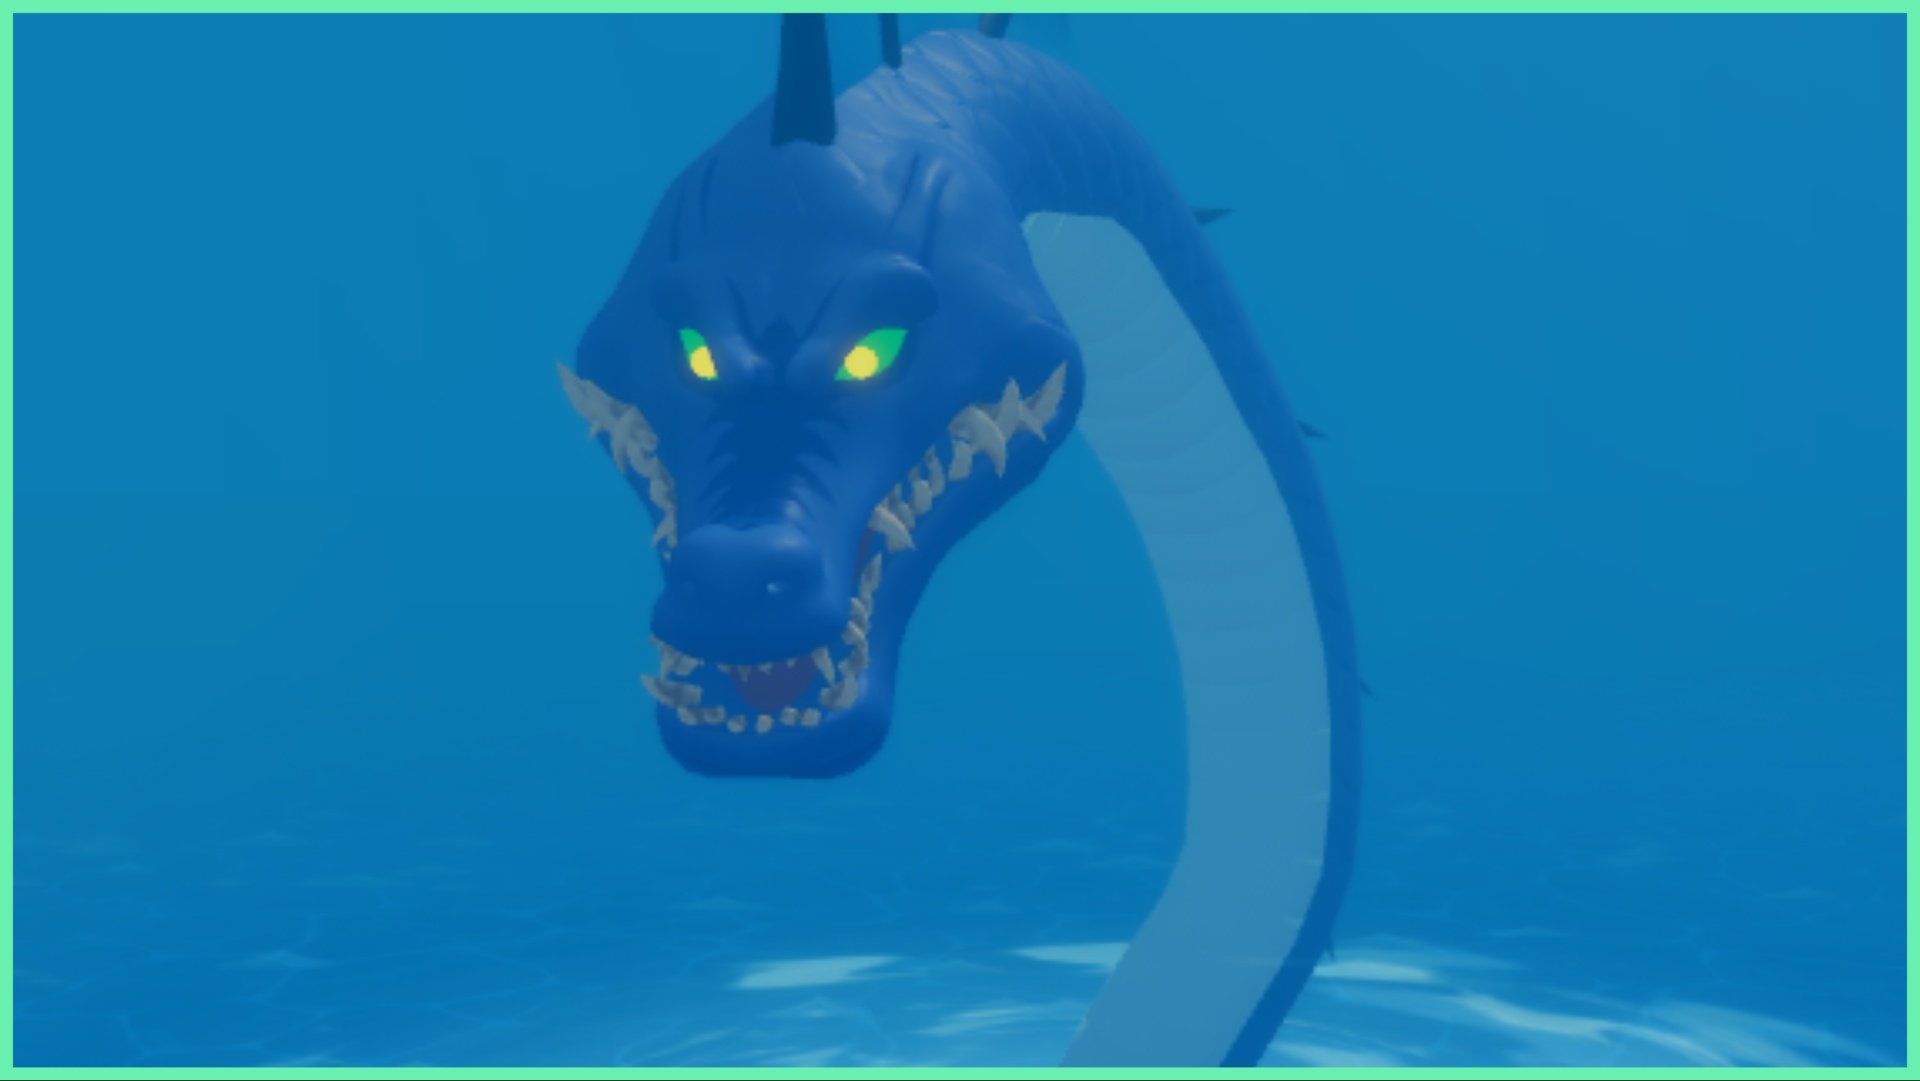 Feature image for our Demon Piece Raids Guide showing a blue sea dragon boss which has a snarly toothy open-mouth stare and unnerving green glowing eyes as it poked out from the ocean